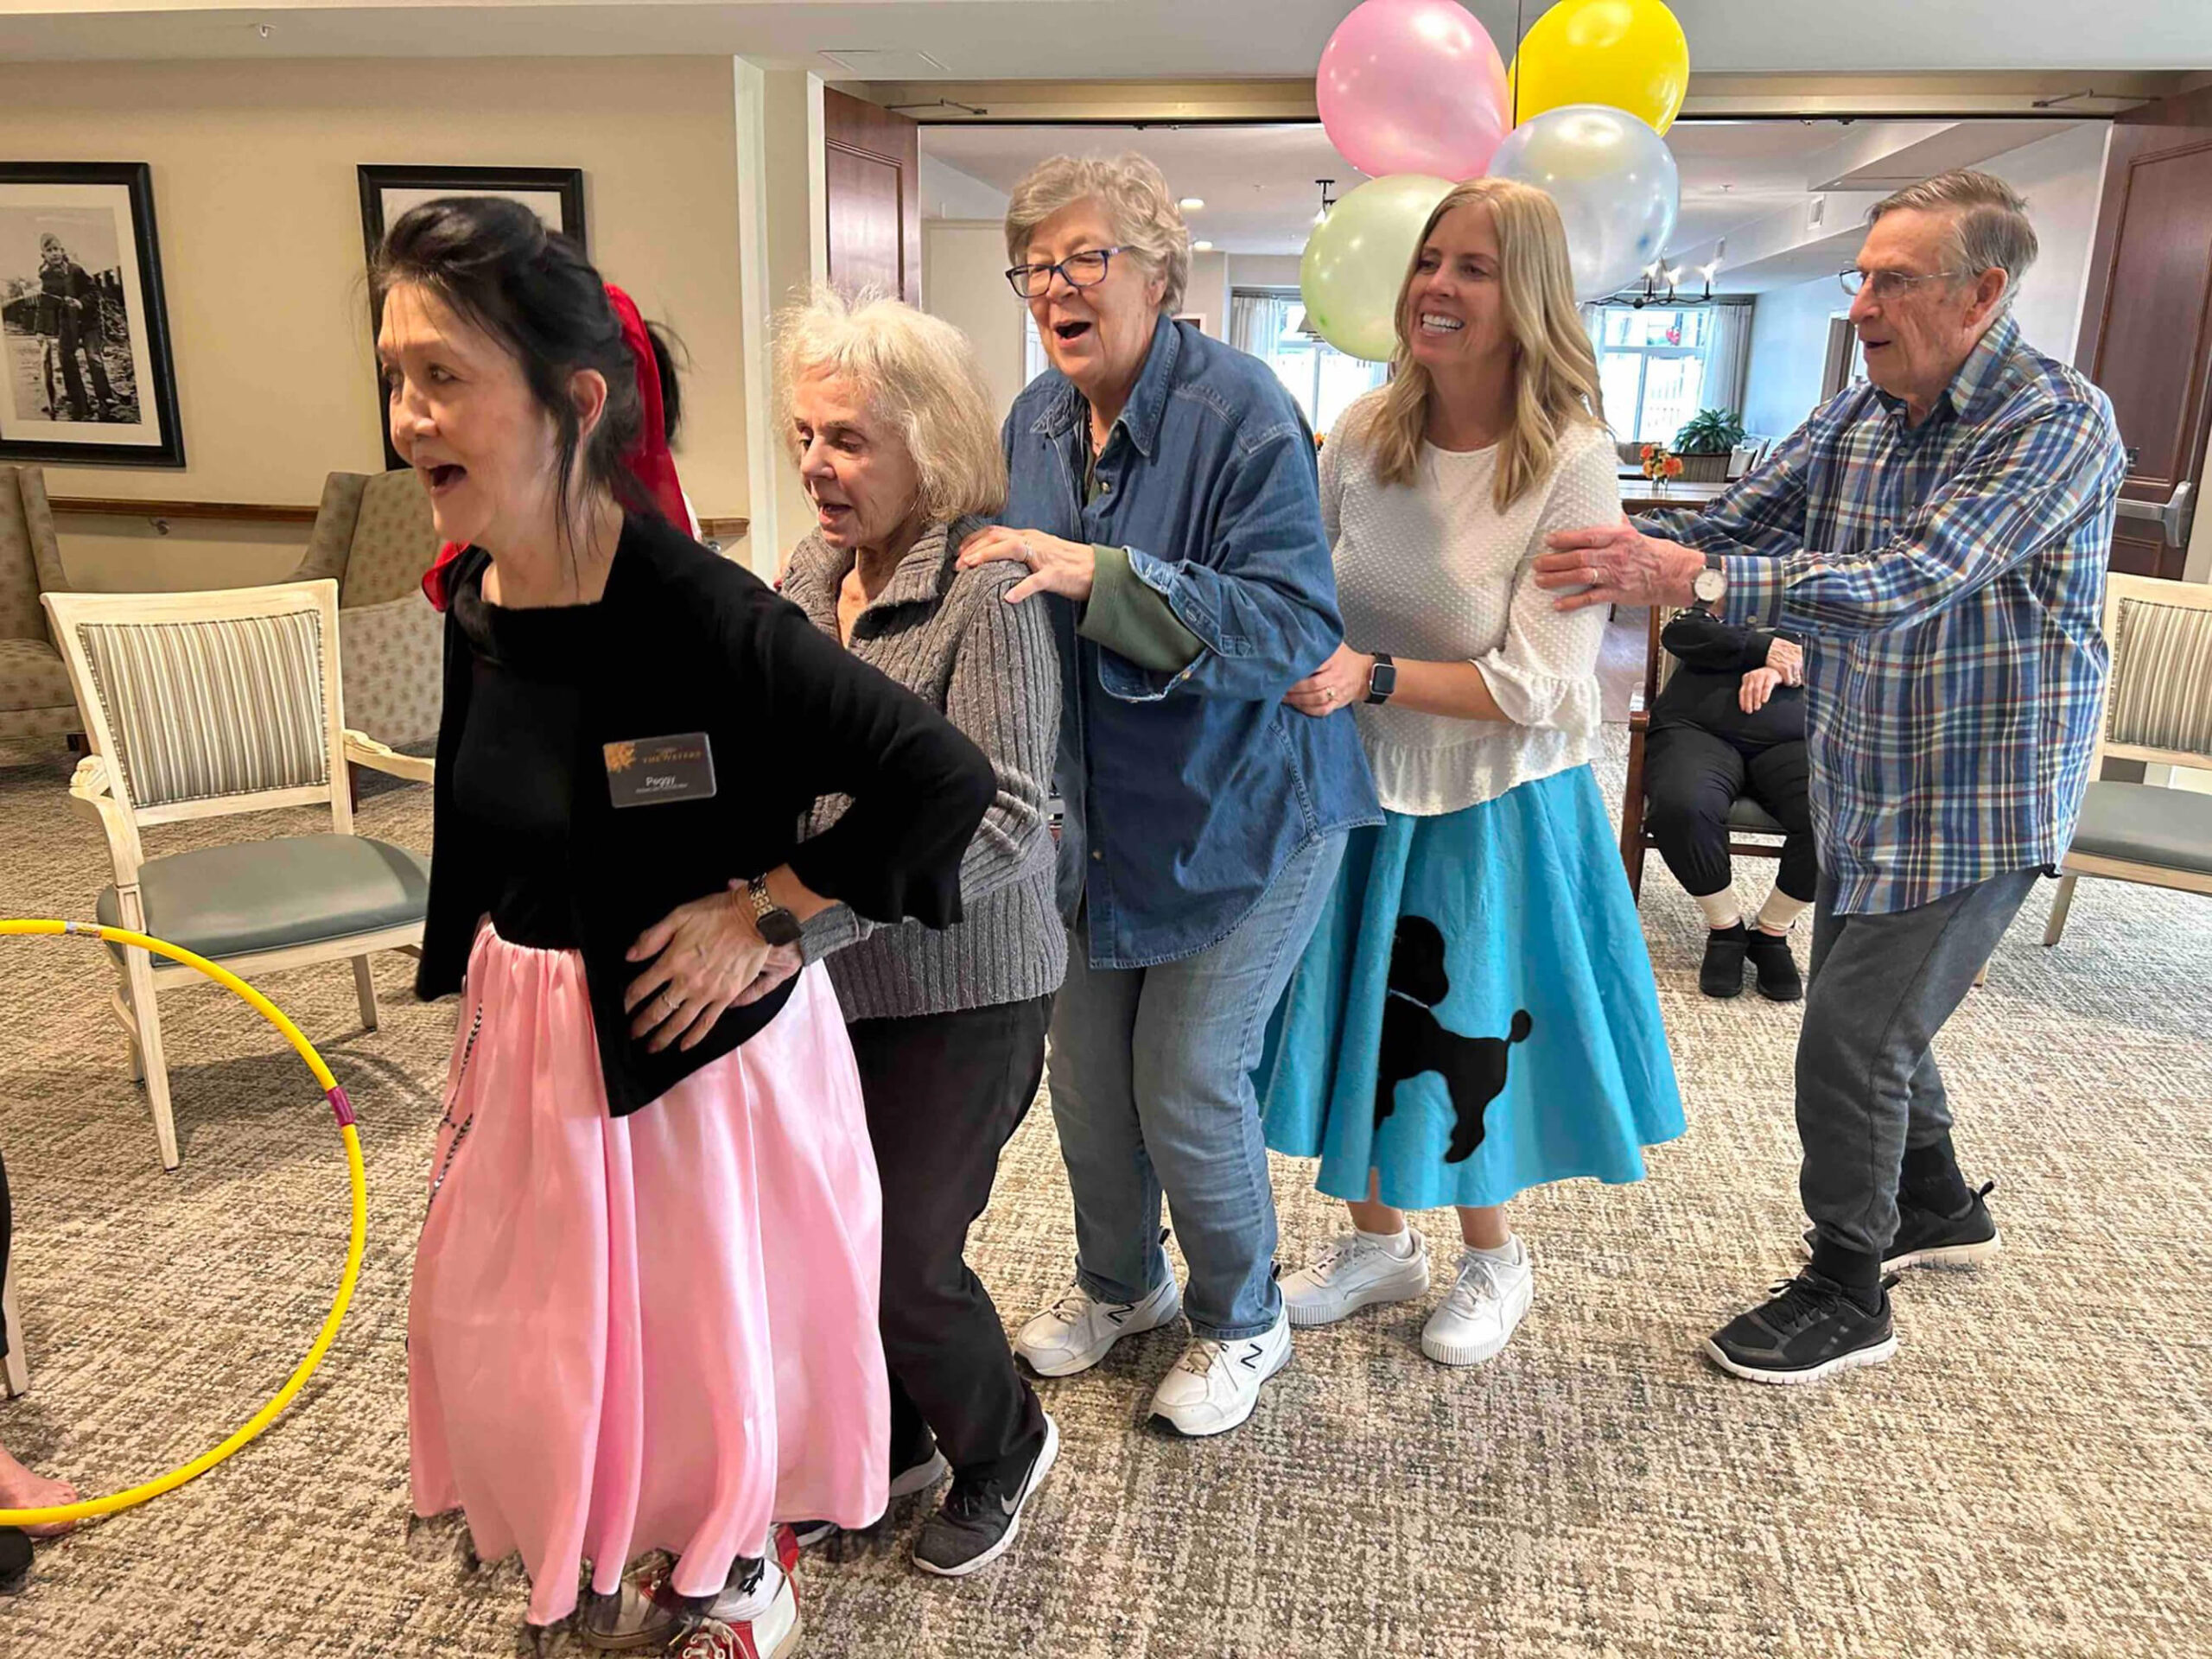 Seniors dancing at a themed party in Edina, laughter and balloons adding to the fun.